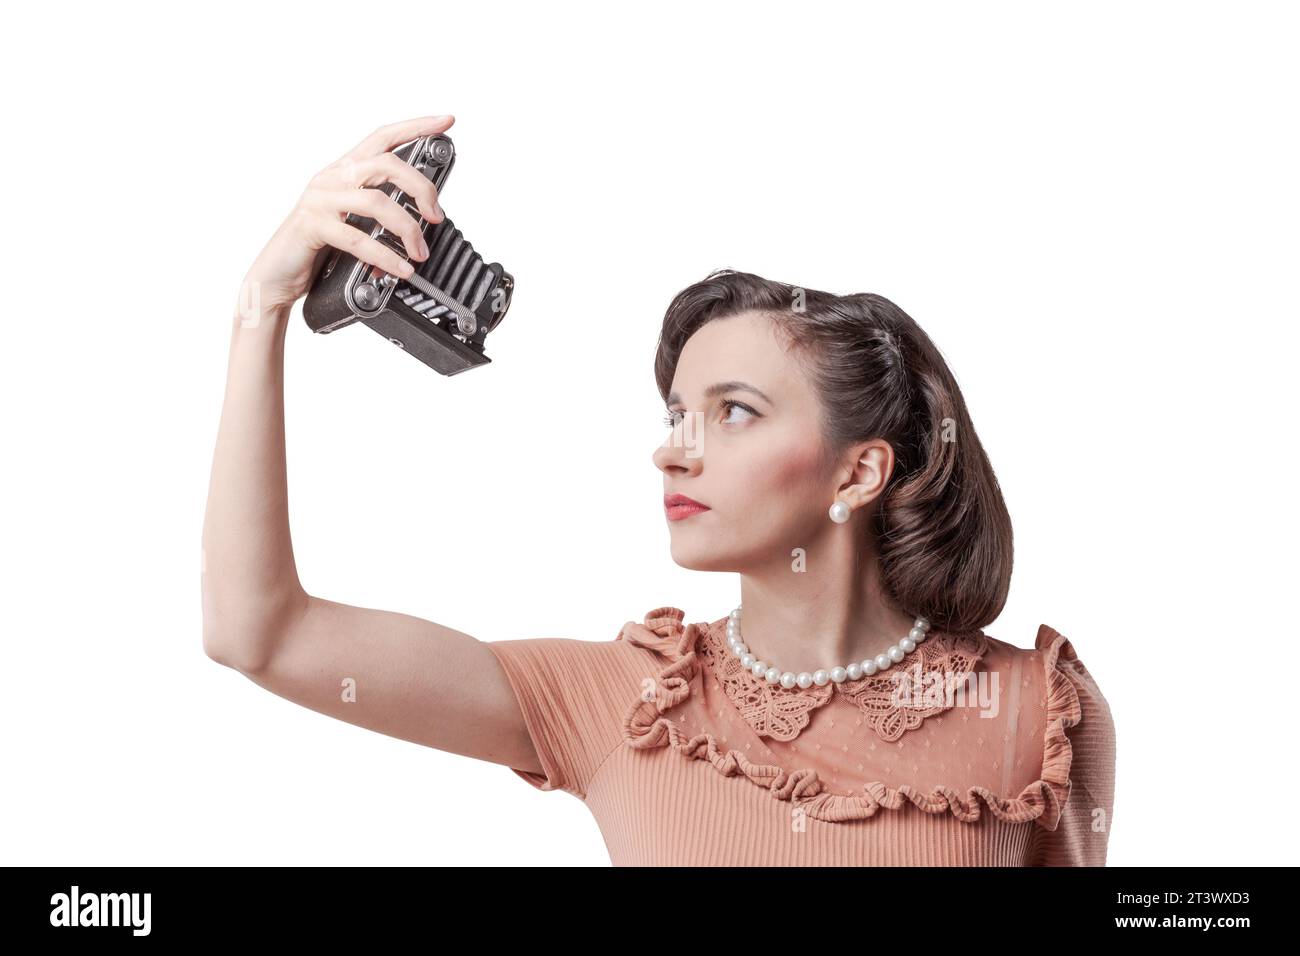 Beautiful elegant woman taking a self-portrait with a vintage camera Stock Photo